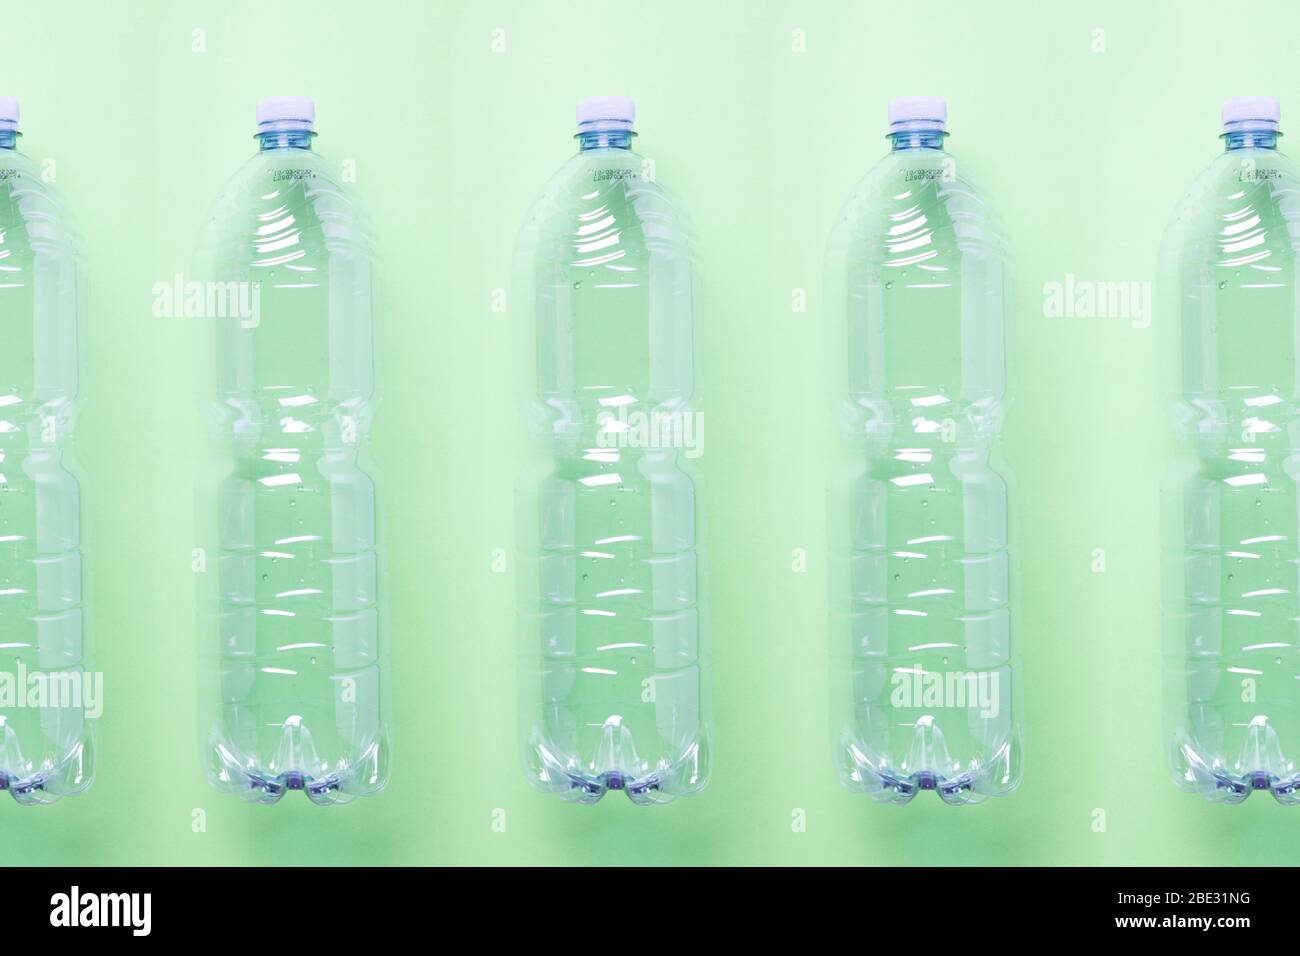 Plastic Grenade, Green Color, Water Bottle Stock Image - Image of green,  exploding: 141377315